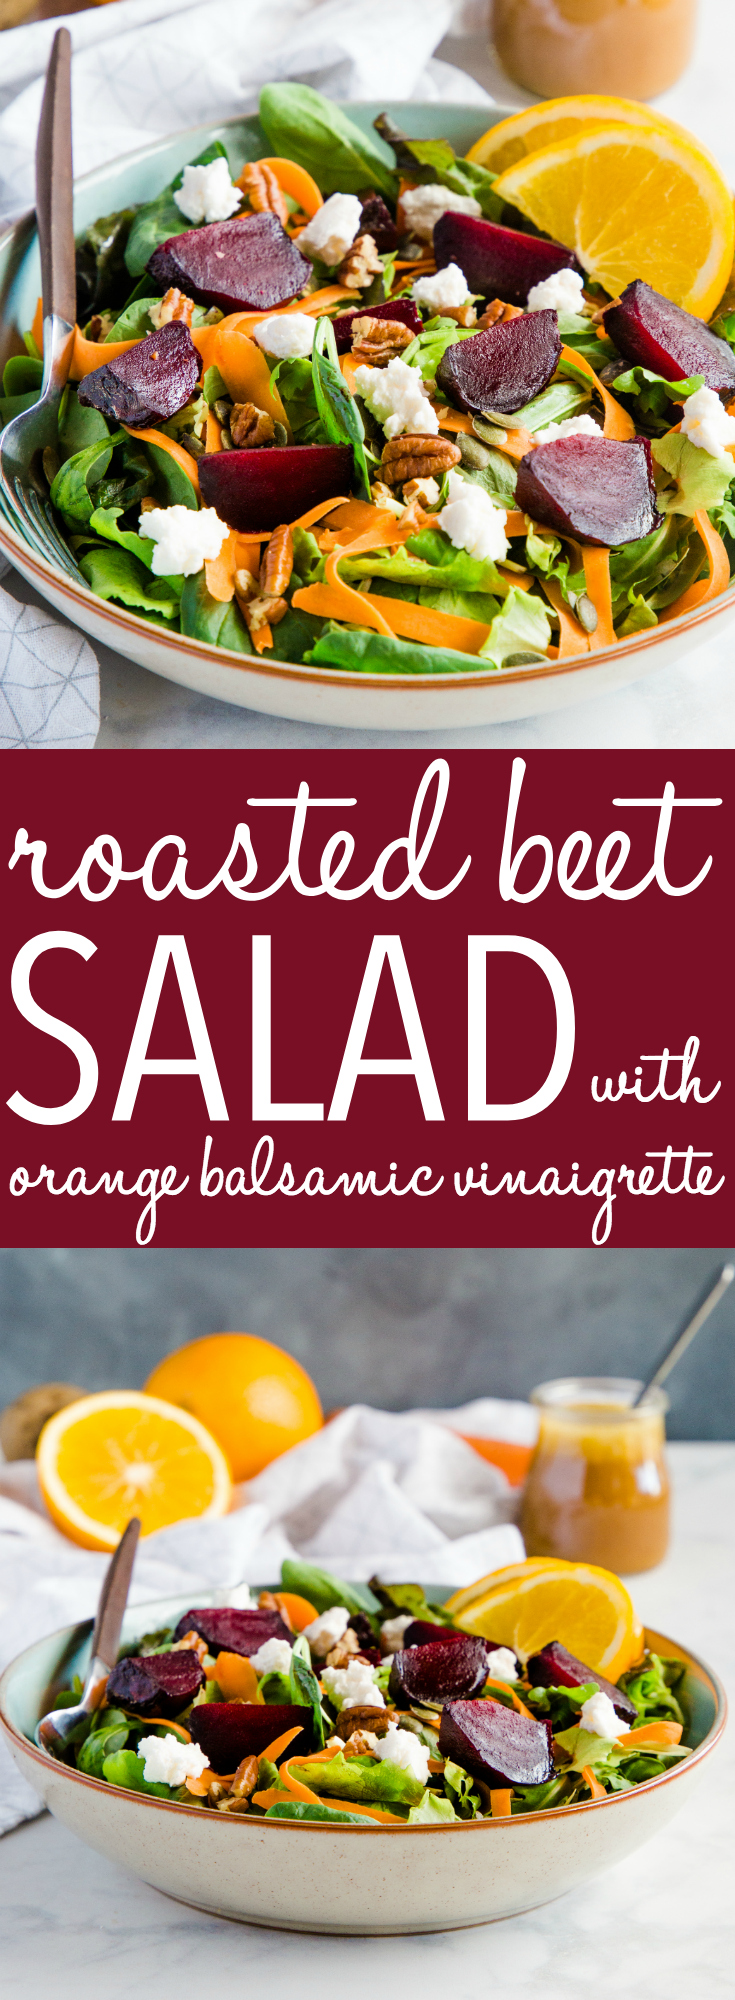 This Roasted Beet Salad with Goat Cheese and Orange Balsamic Vinaigrette is the perfect harvest salad with fresh greens, roasted beets, nuts and seeds, and an easy dressing made with fresh oranges! Recipe from thebusybaker.ca! #beets #salad #healthy #harvest #fall #autumn #weightloss #vegetarian #vegan #vinaigrette #homemadesaladdressing #saladdressing #orange #greens #goatcheese via @busybakerblog